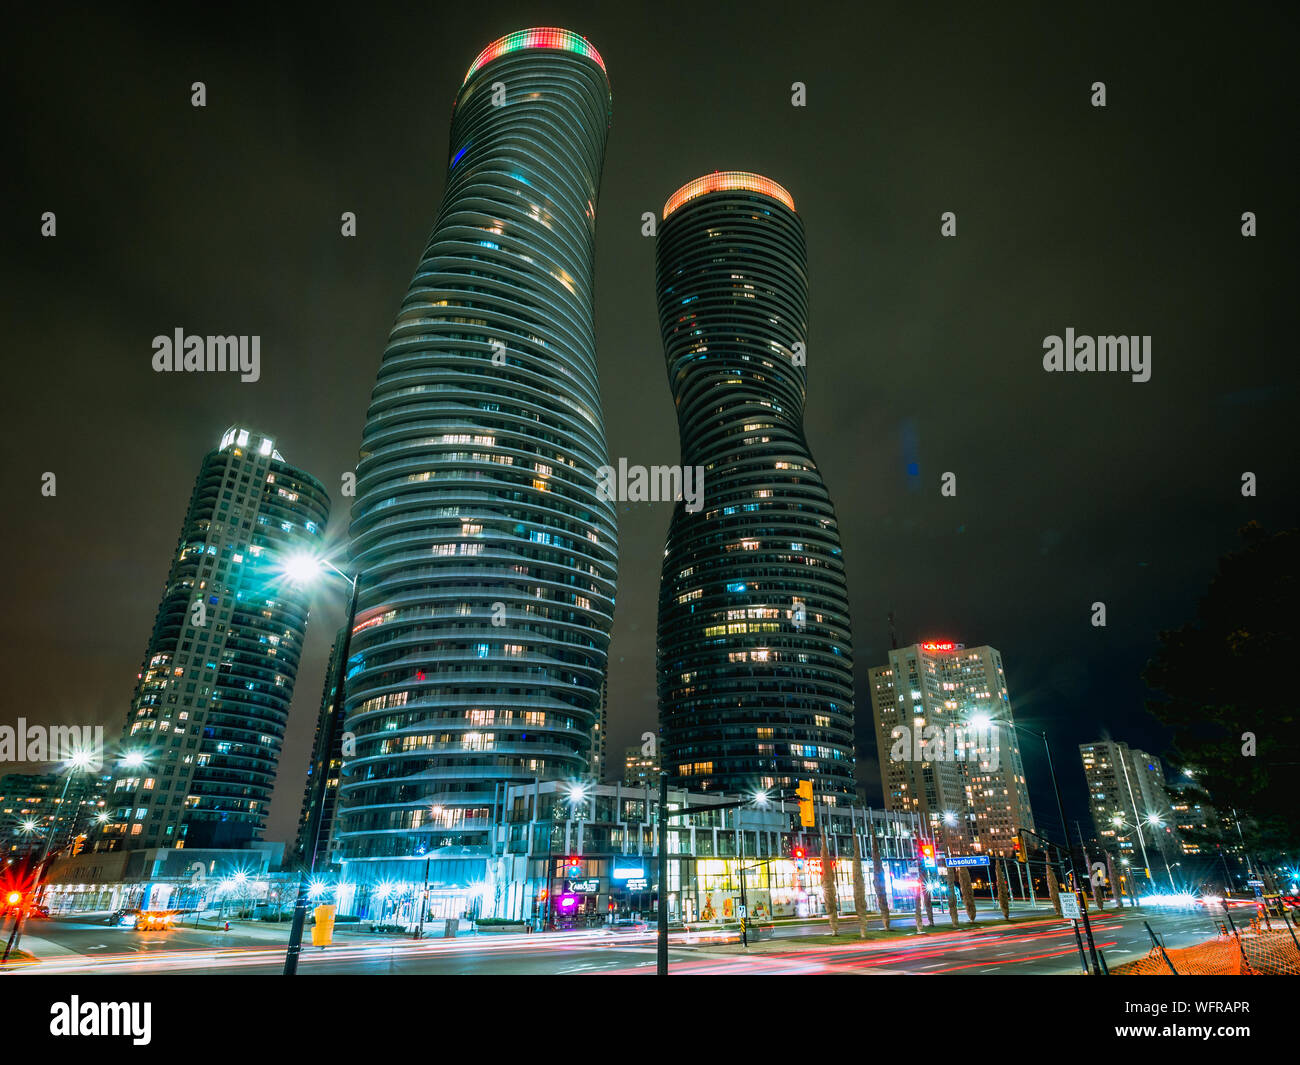 The Absolute Towers Condominiums Mississauga, Ontario Canada a.k.a. (aka)  Marilyn Monroe buildings during night time (with holiday lights Stock Photo  - Alamy